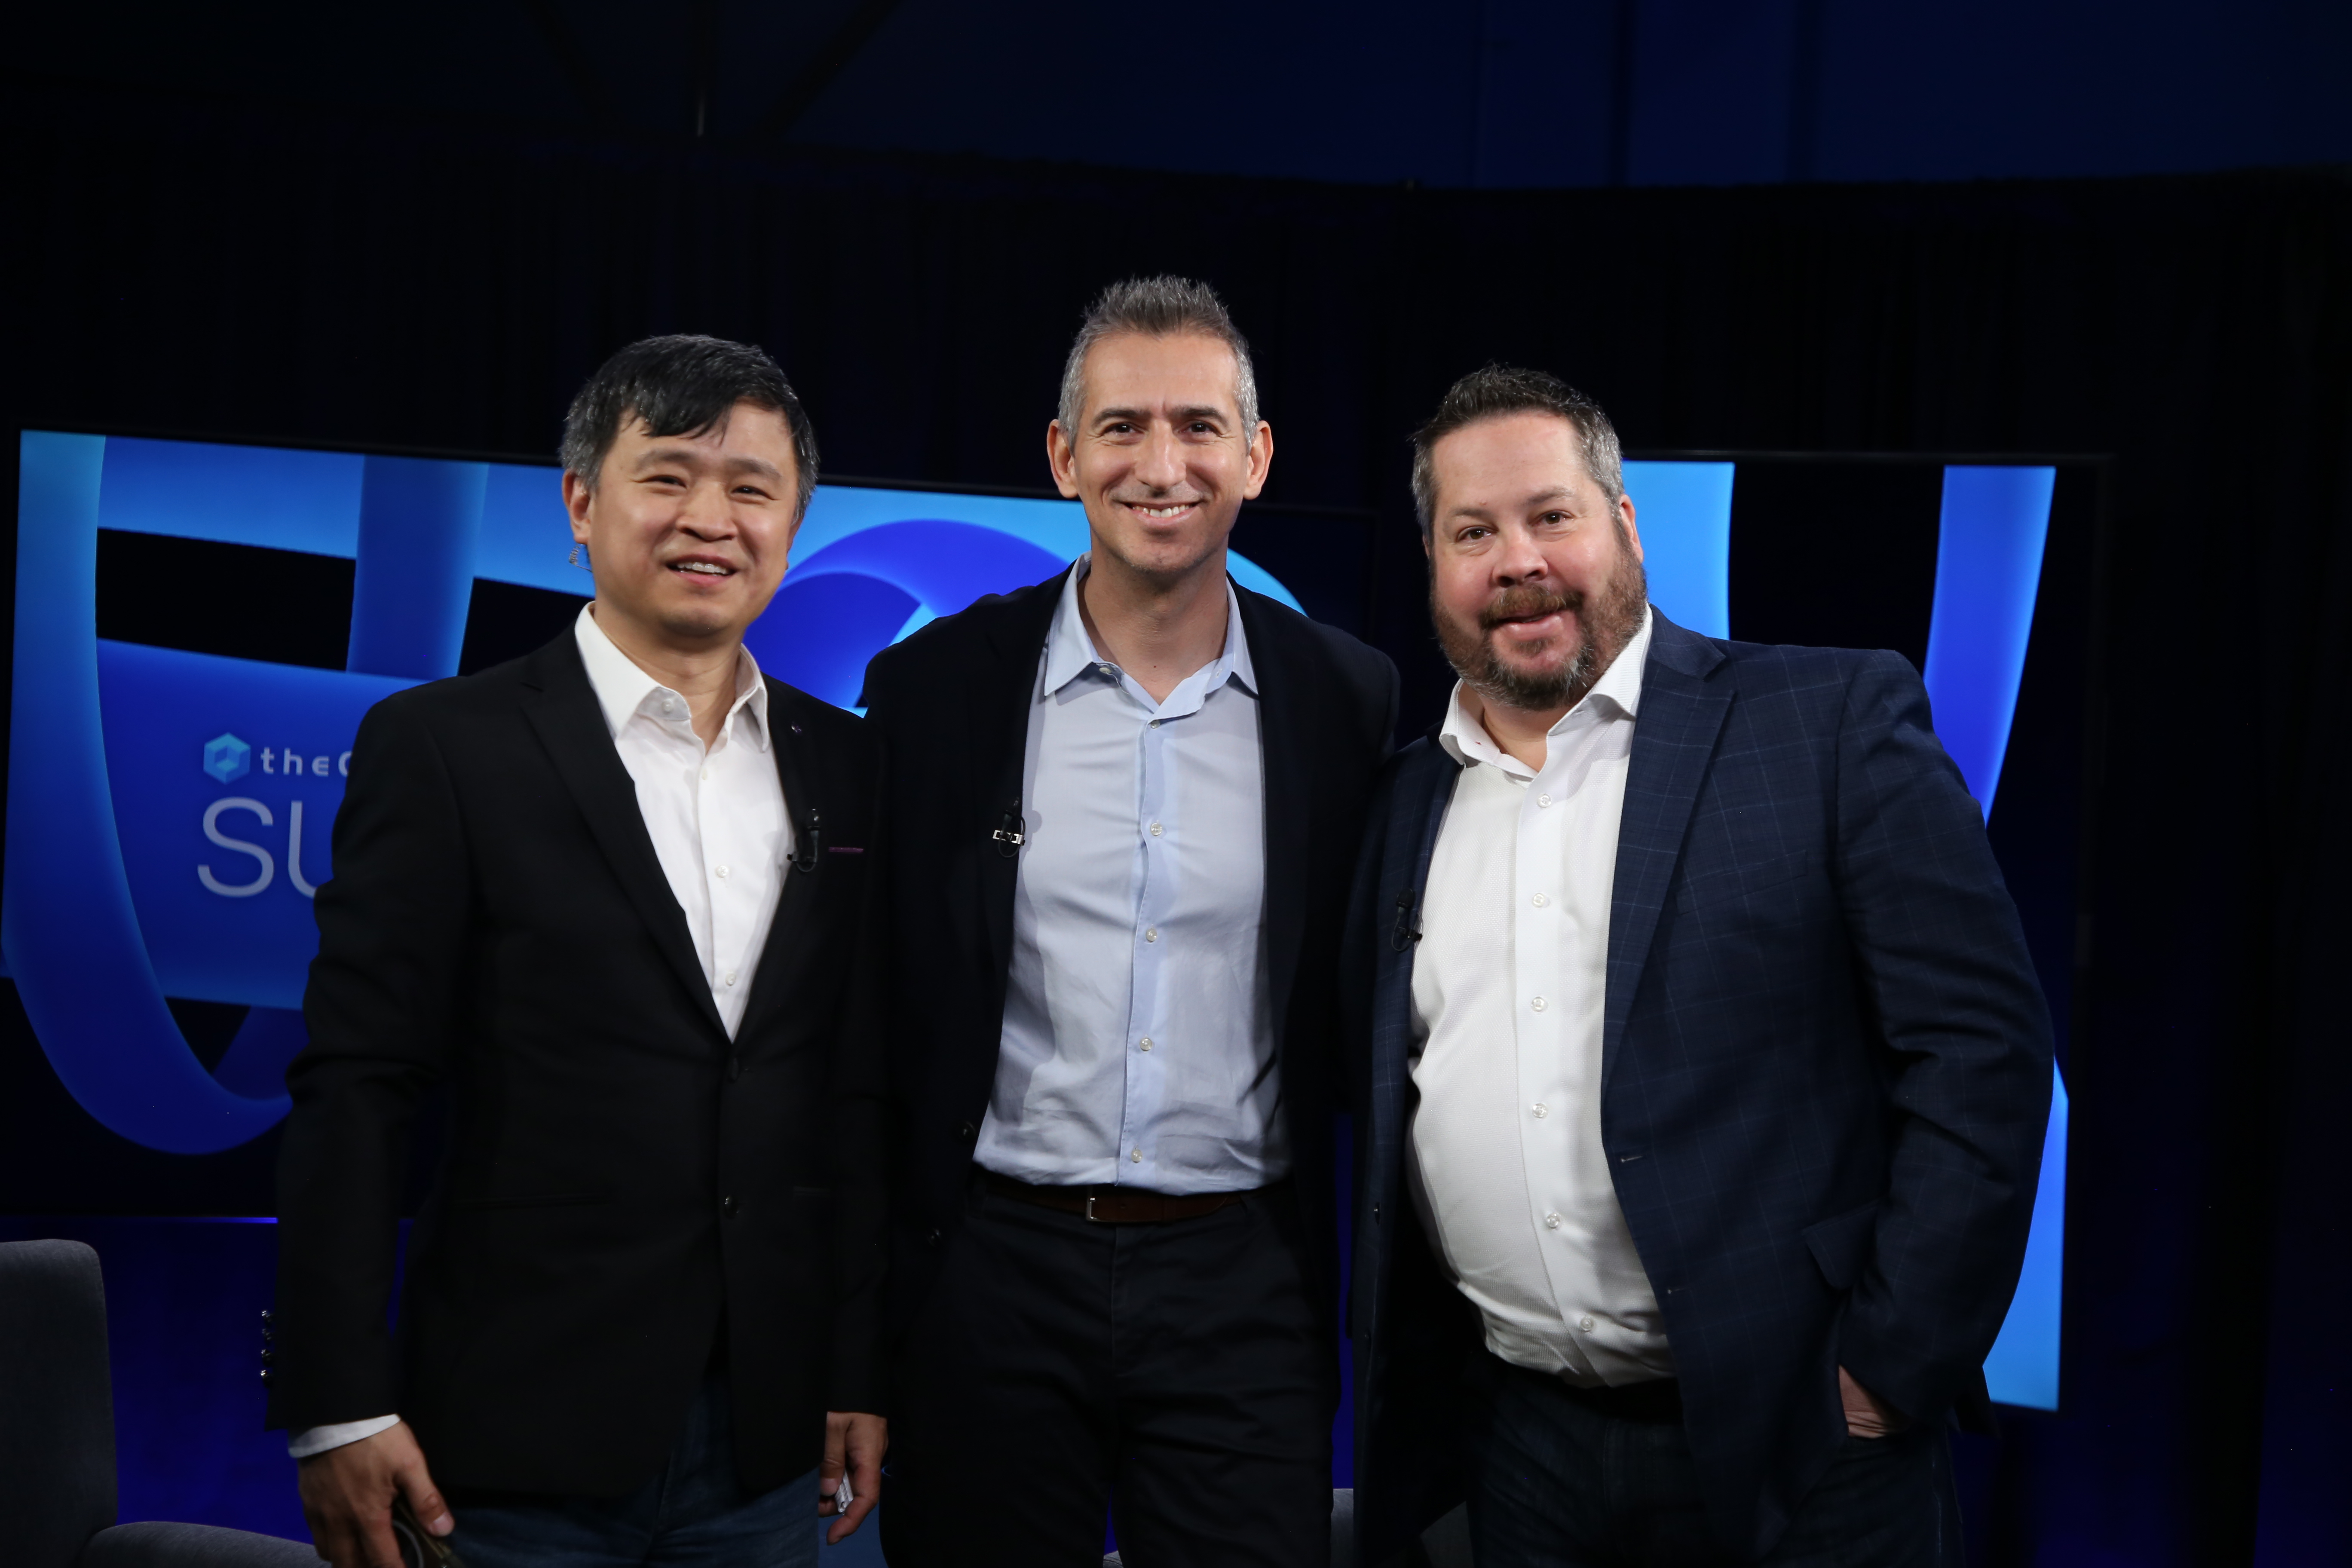 Analyst Howie Xu talks to Baris Gultekin, from Snowflake, and Matt Hull, from Nvidia, about AI innovation as a part of theCUBE’s coverage of Supercloud 6.